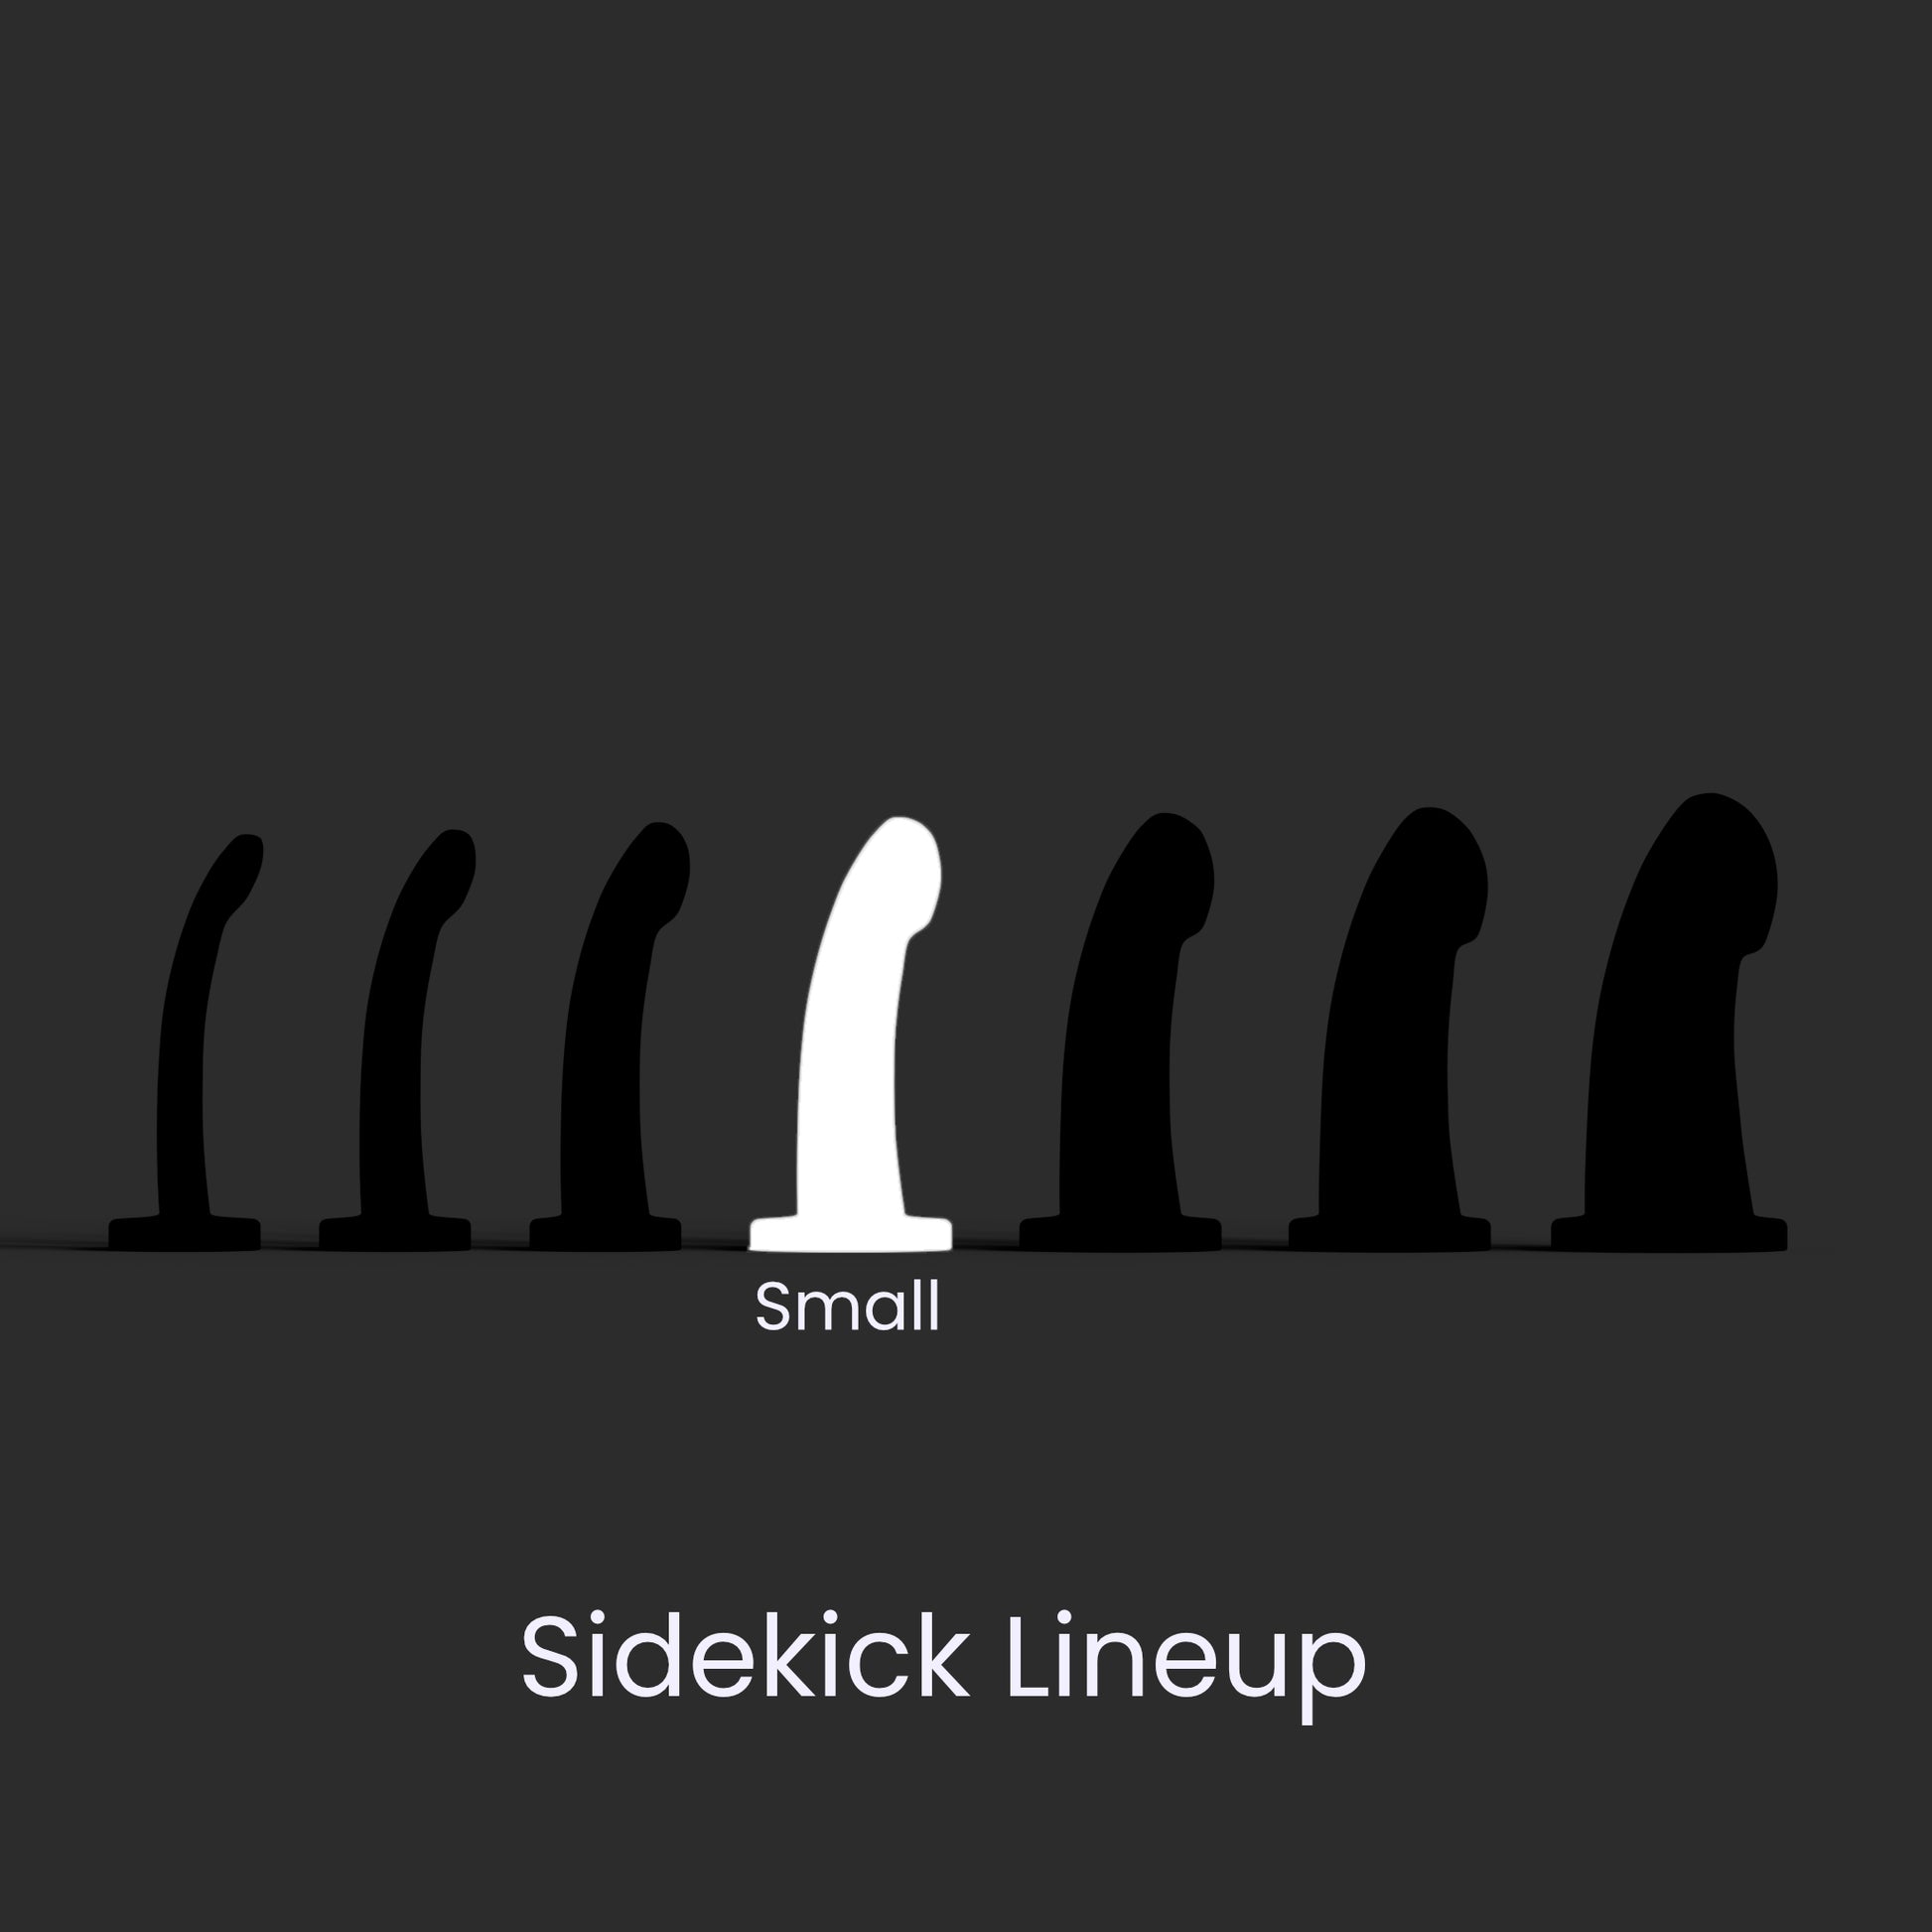 Diagram showing the seven Sidekick models lined up left to right smallest to largest, and the Small in the middle position.